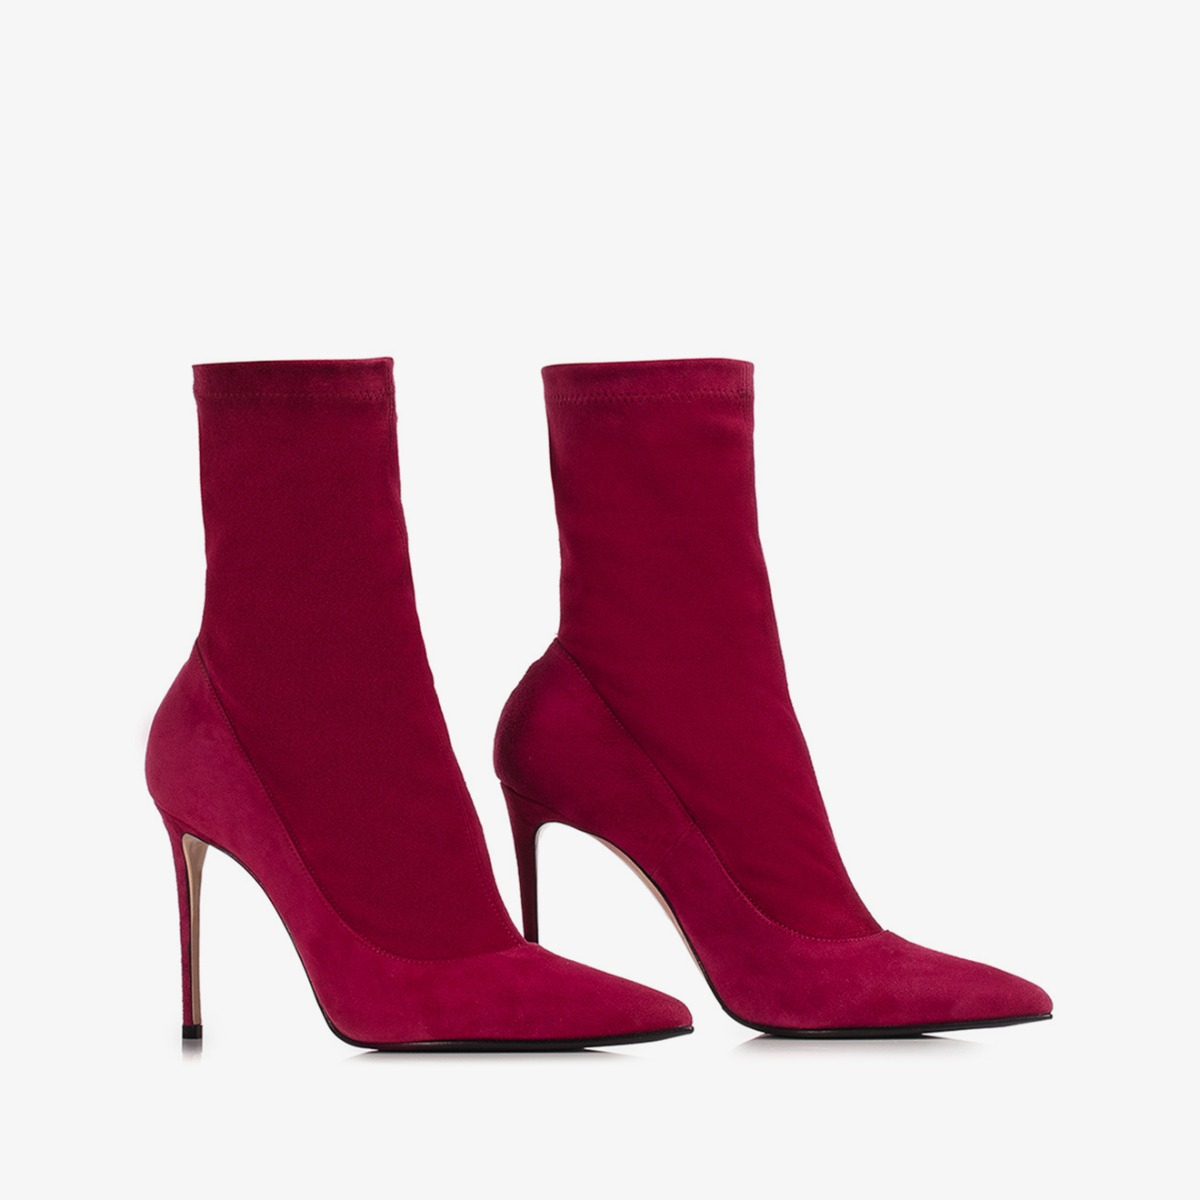 EVA ANKLE BOOT 100 mm - Le Silla official outlet